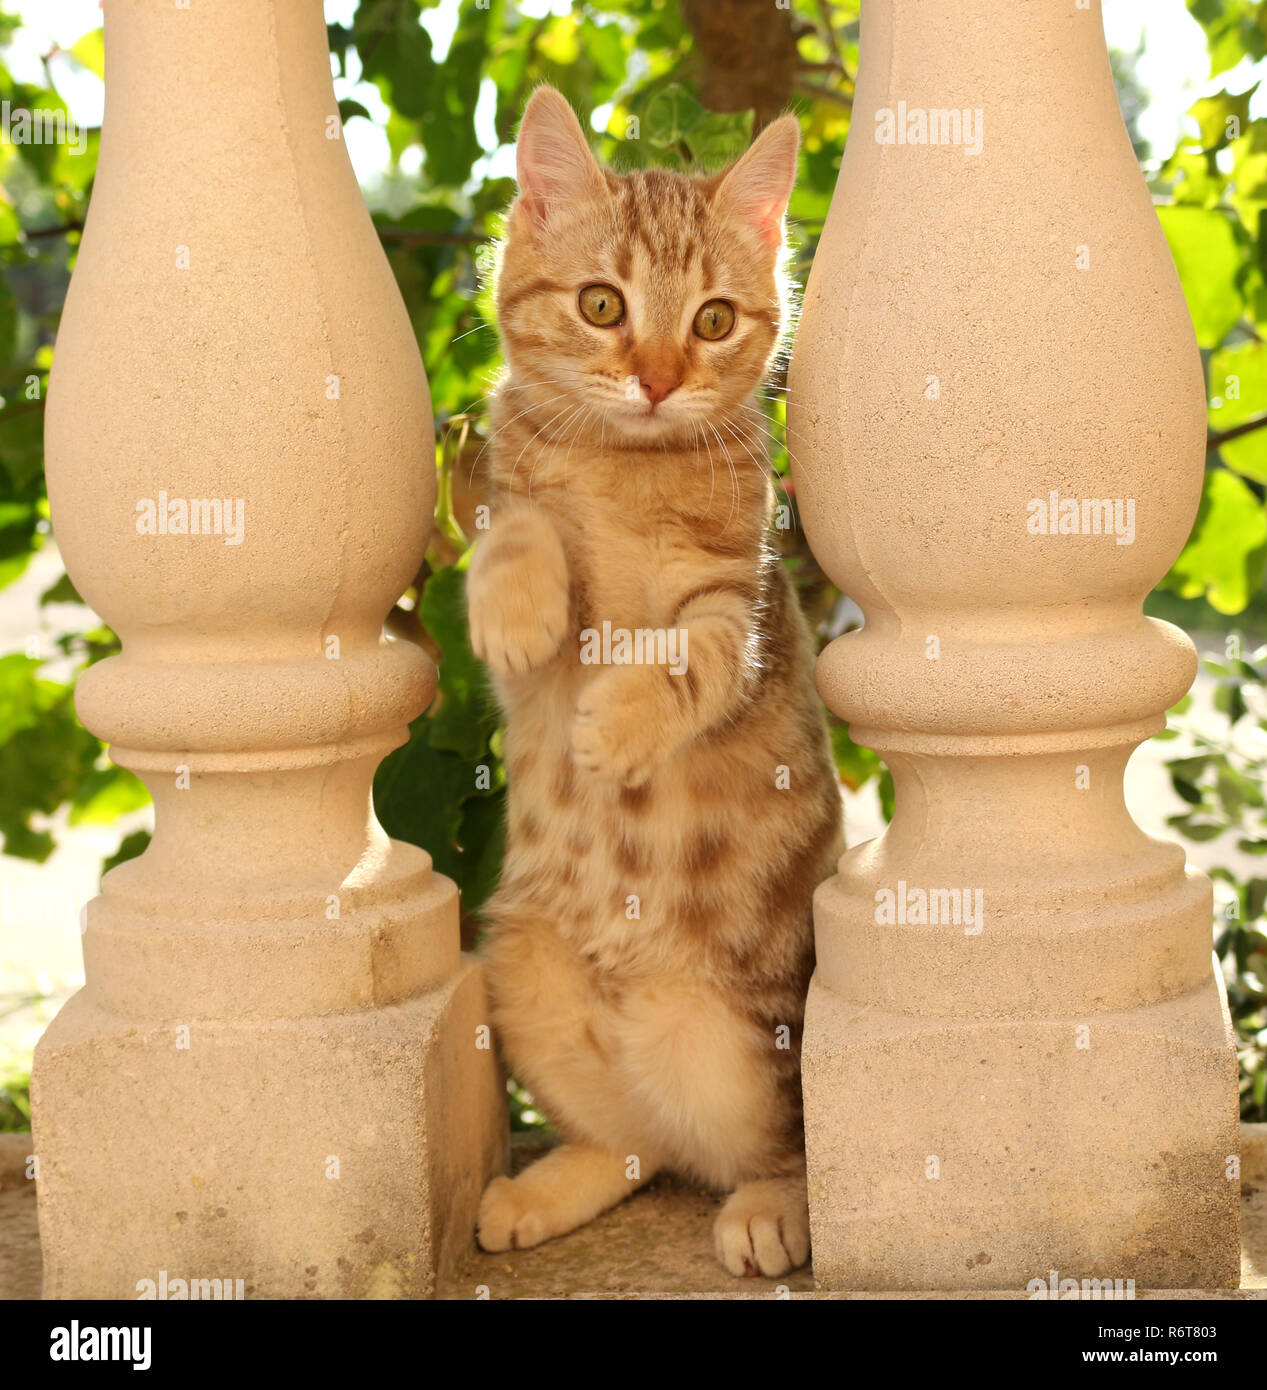 young ginger cat, 3 month old, looking through a balustrade Stock Photo